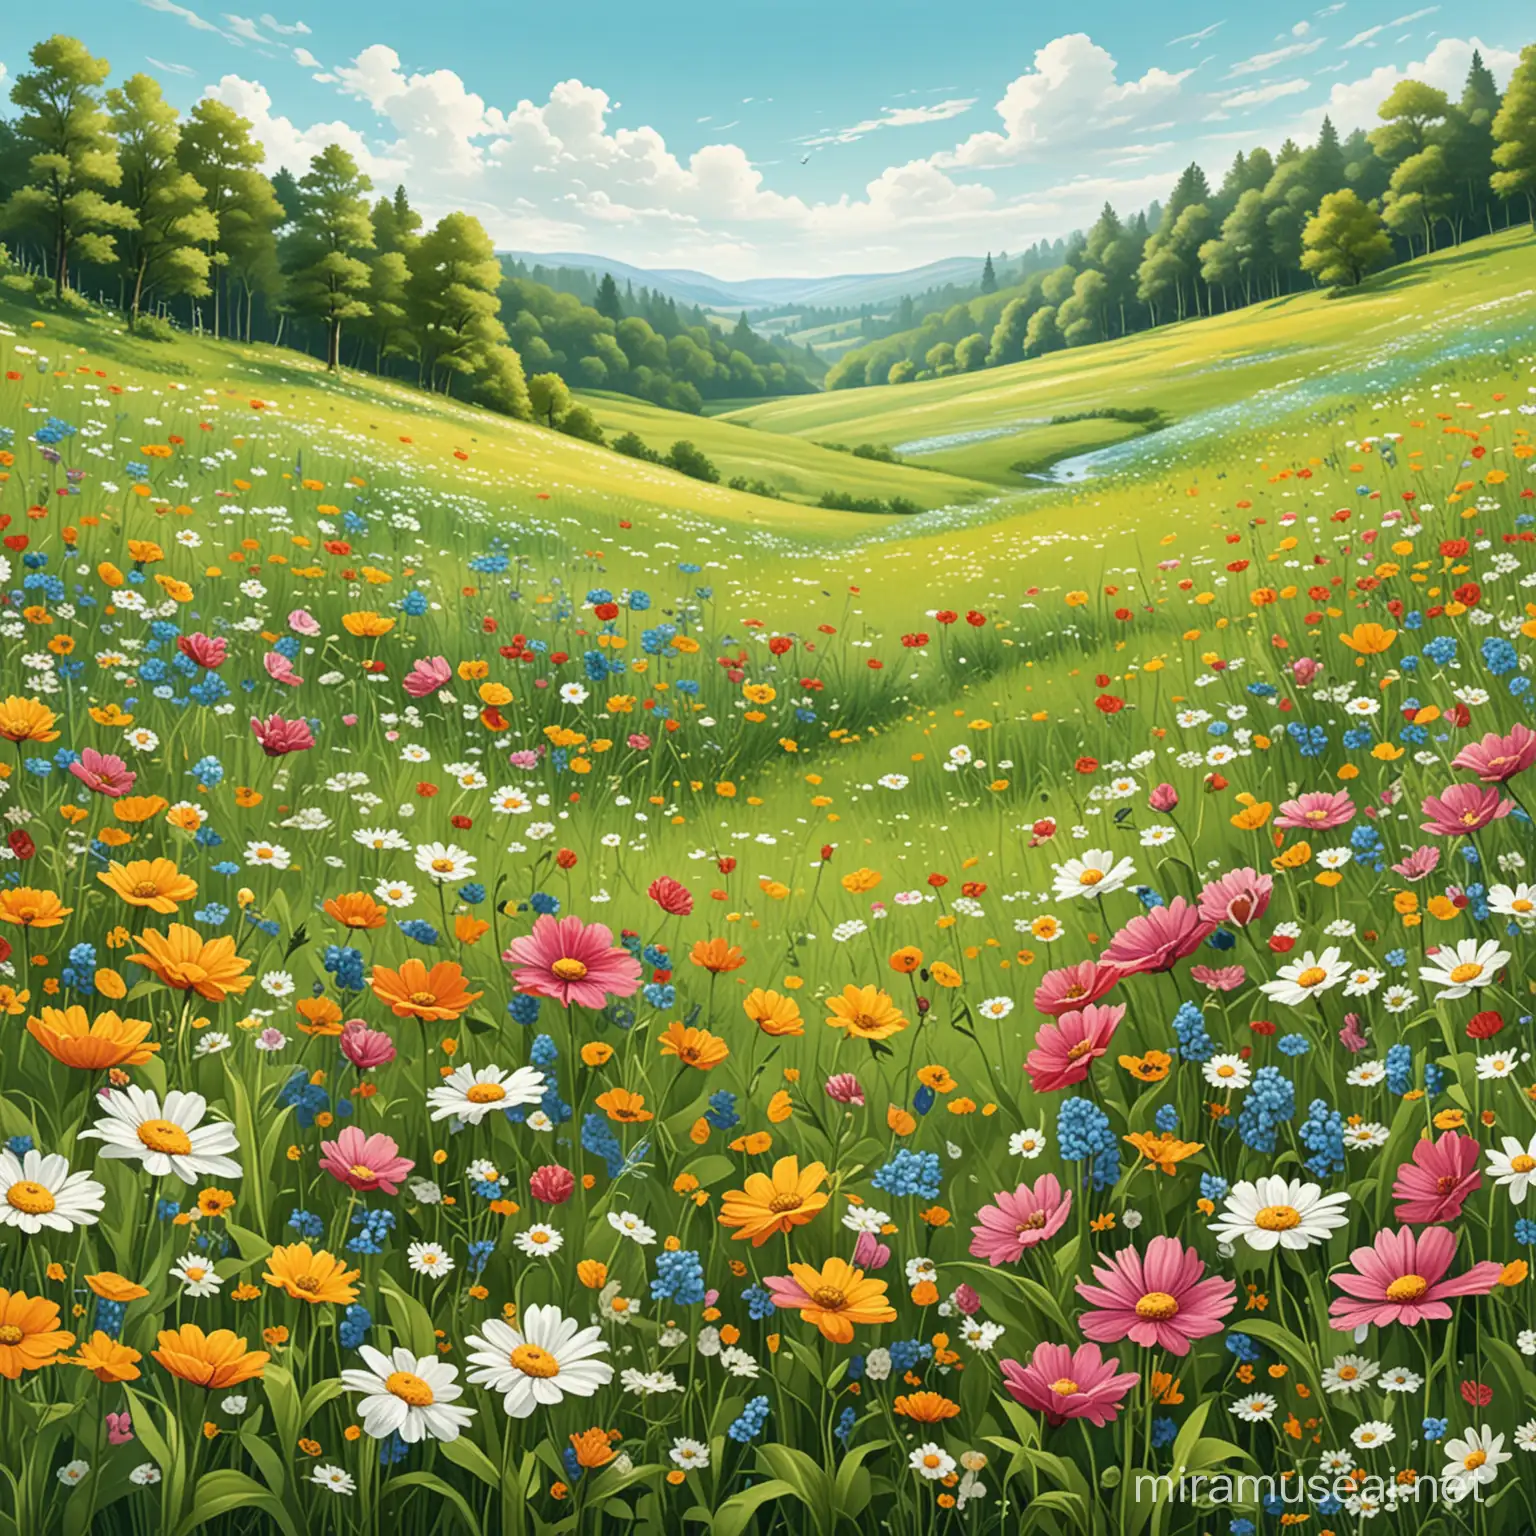 Vibrant Spring Blossoms in a Serene Meadow